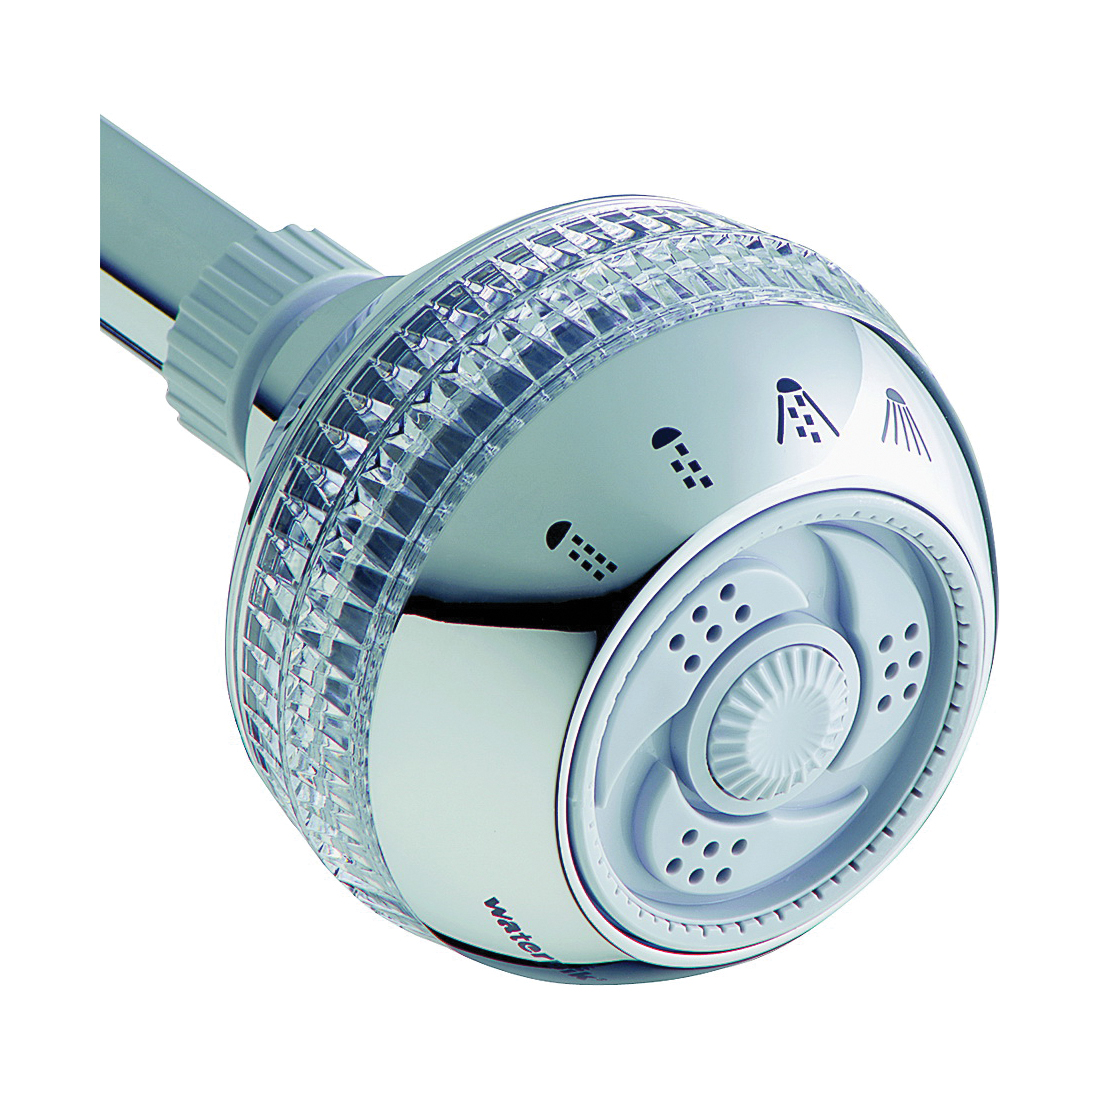 SM-423CGE Fixed Shower Head, Round, 1.8 gpm, 1/2 in Connection, Plastic, Chrome, 3-1/4 in Dia, 3-1/4 in W